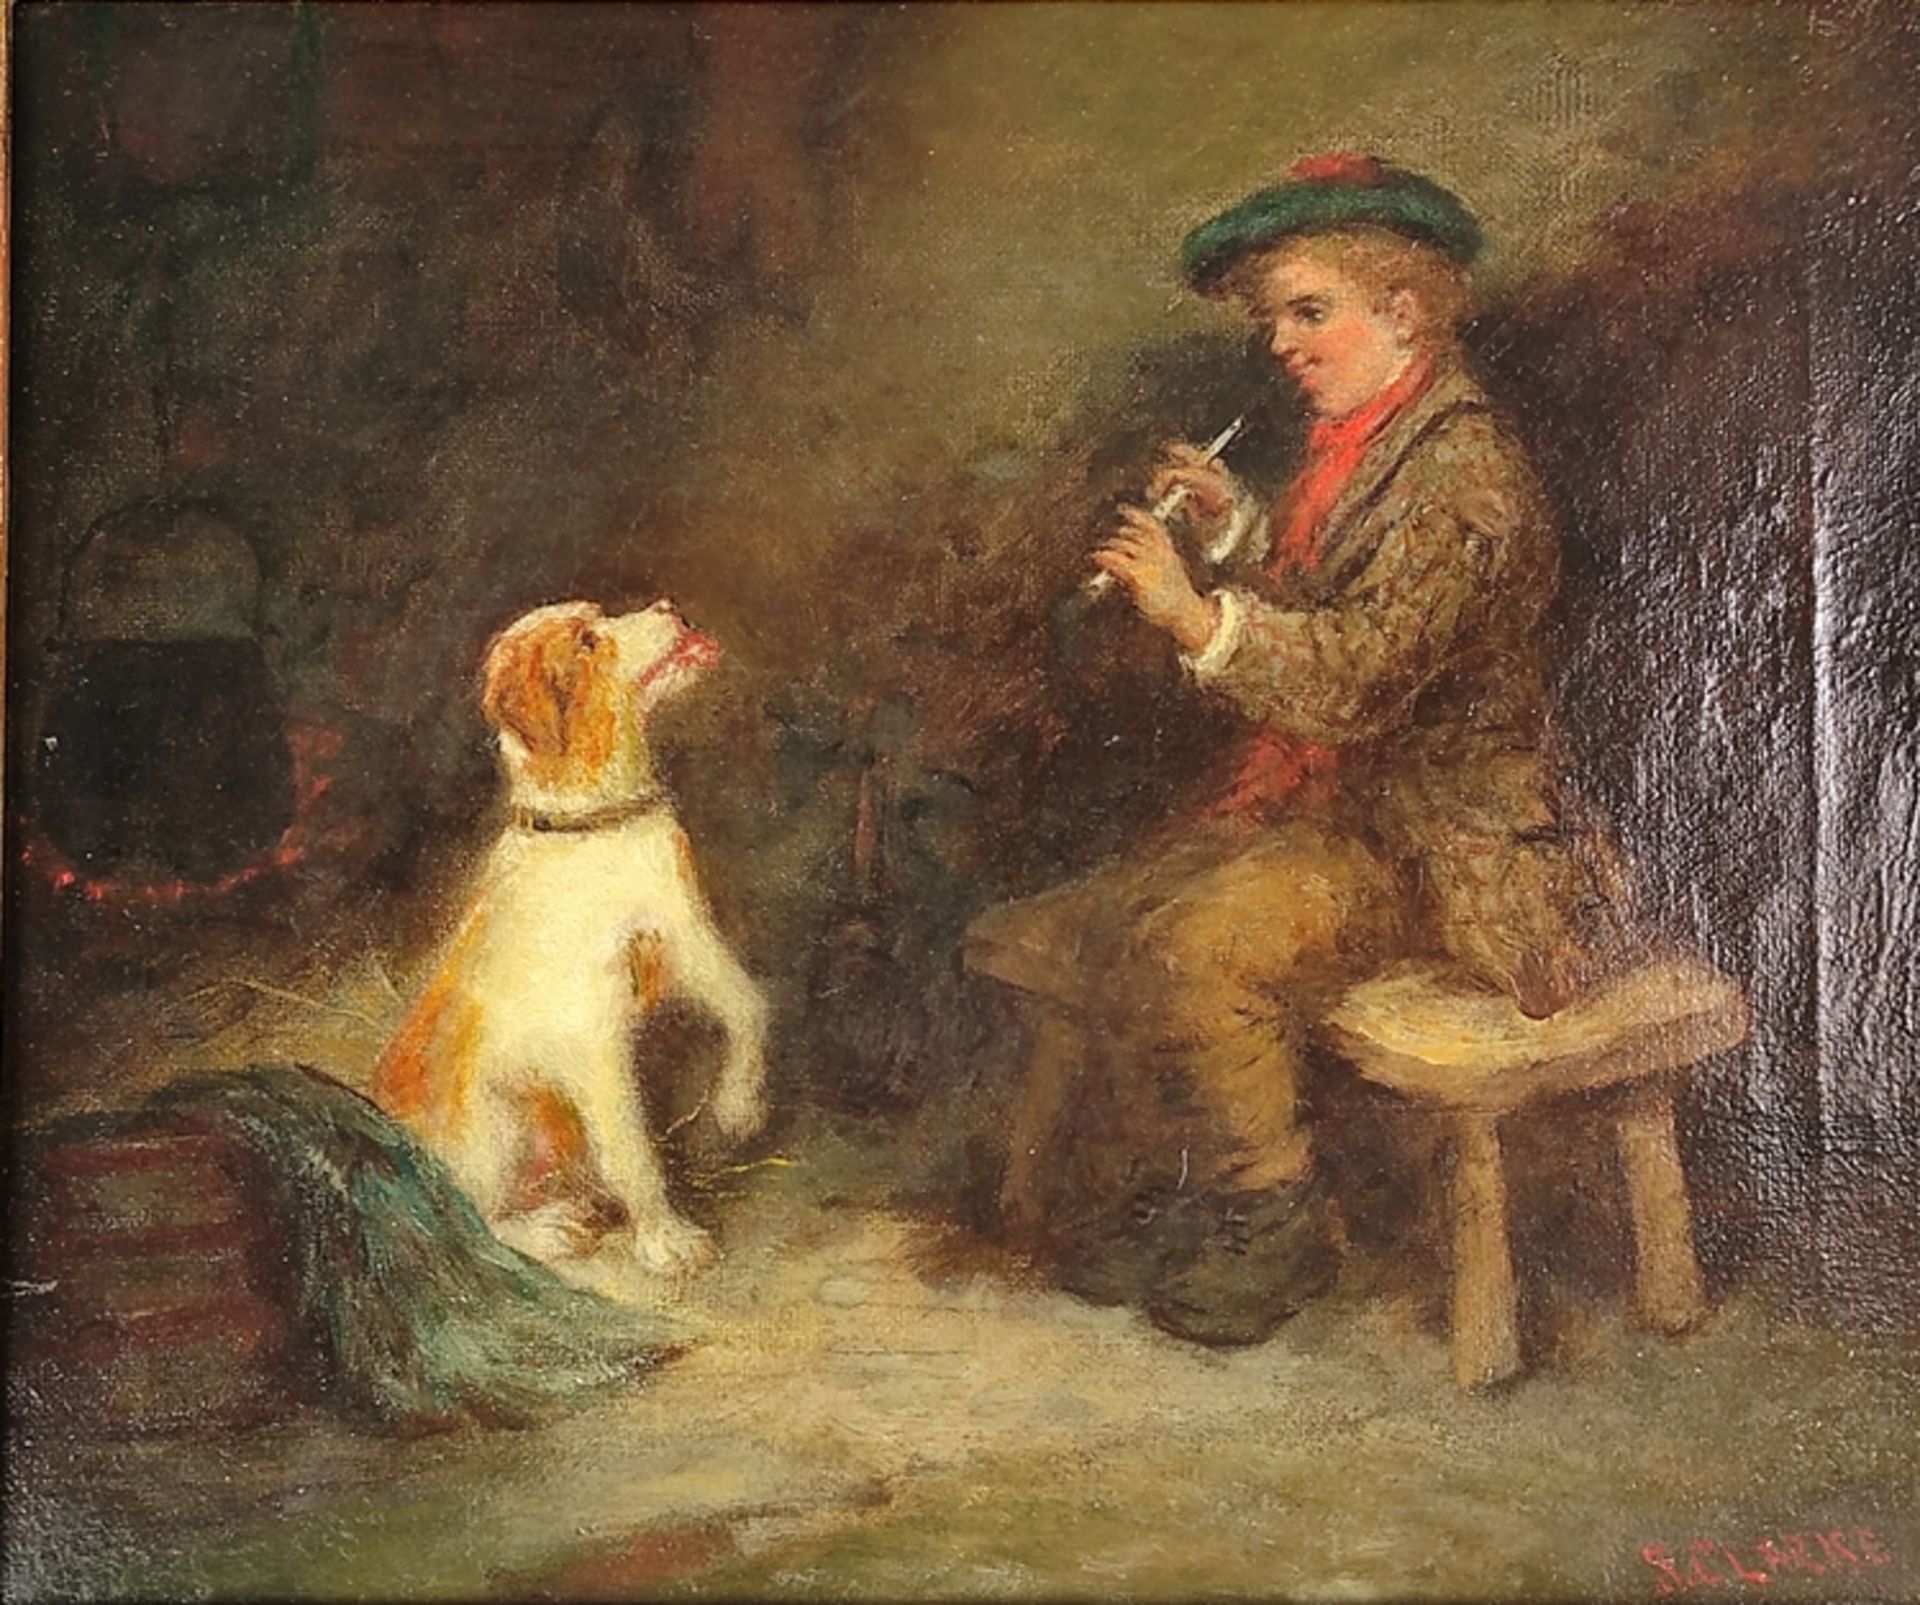 Clarke, S. (19th century, England) "Playing music", little boy playing flute to a dog, oil on canva